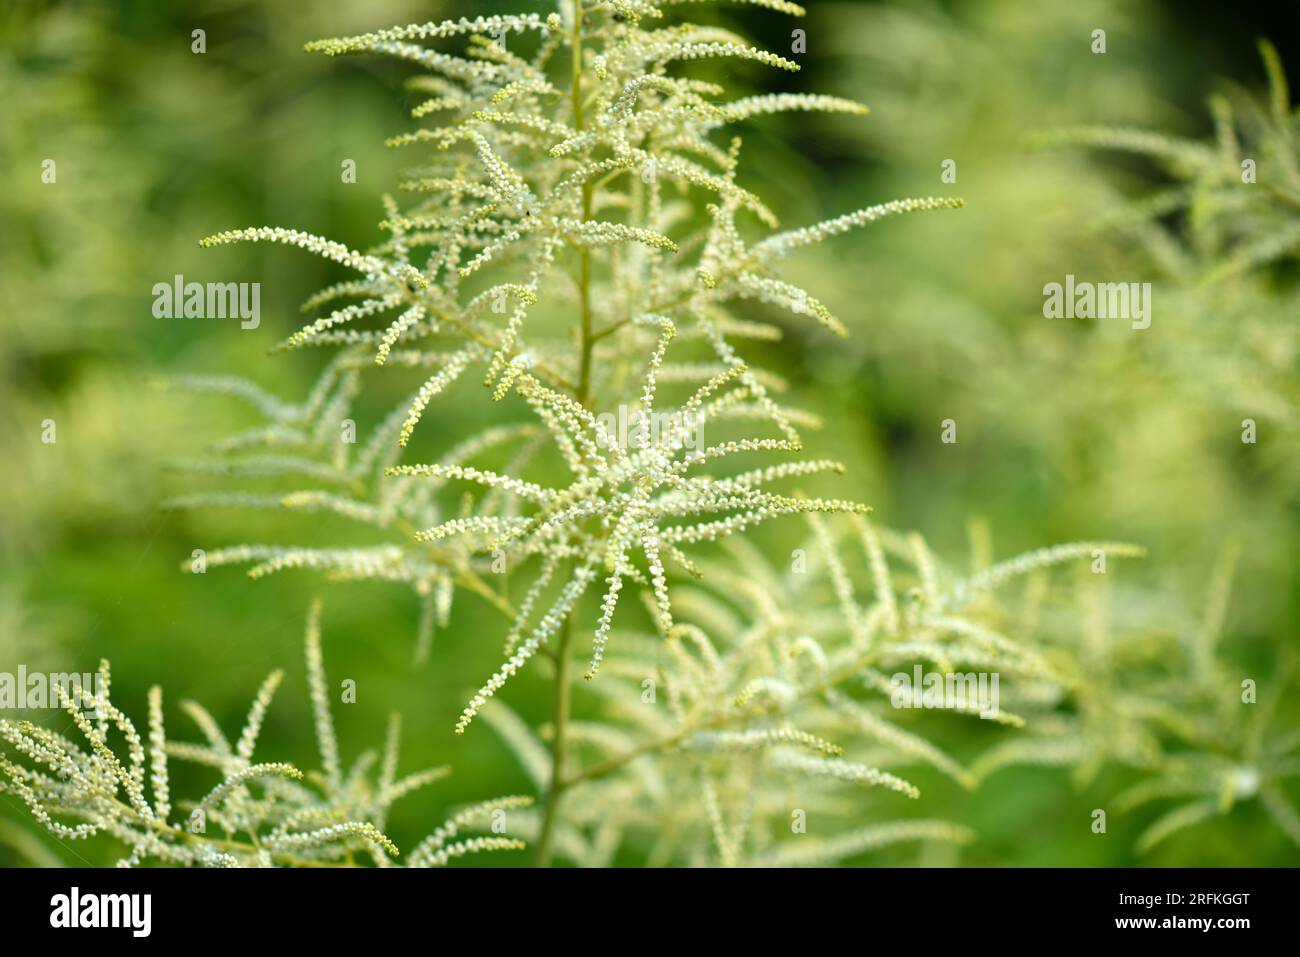 Volzhanka ordinary, or Aruncus dioicus grows and blooms in the garden in summer. Natural background Stock Photo